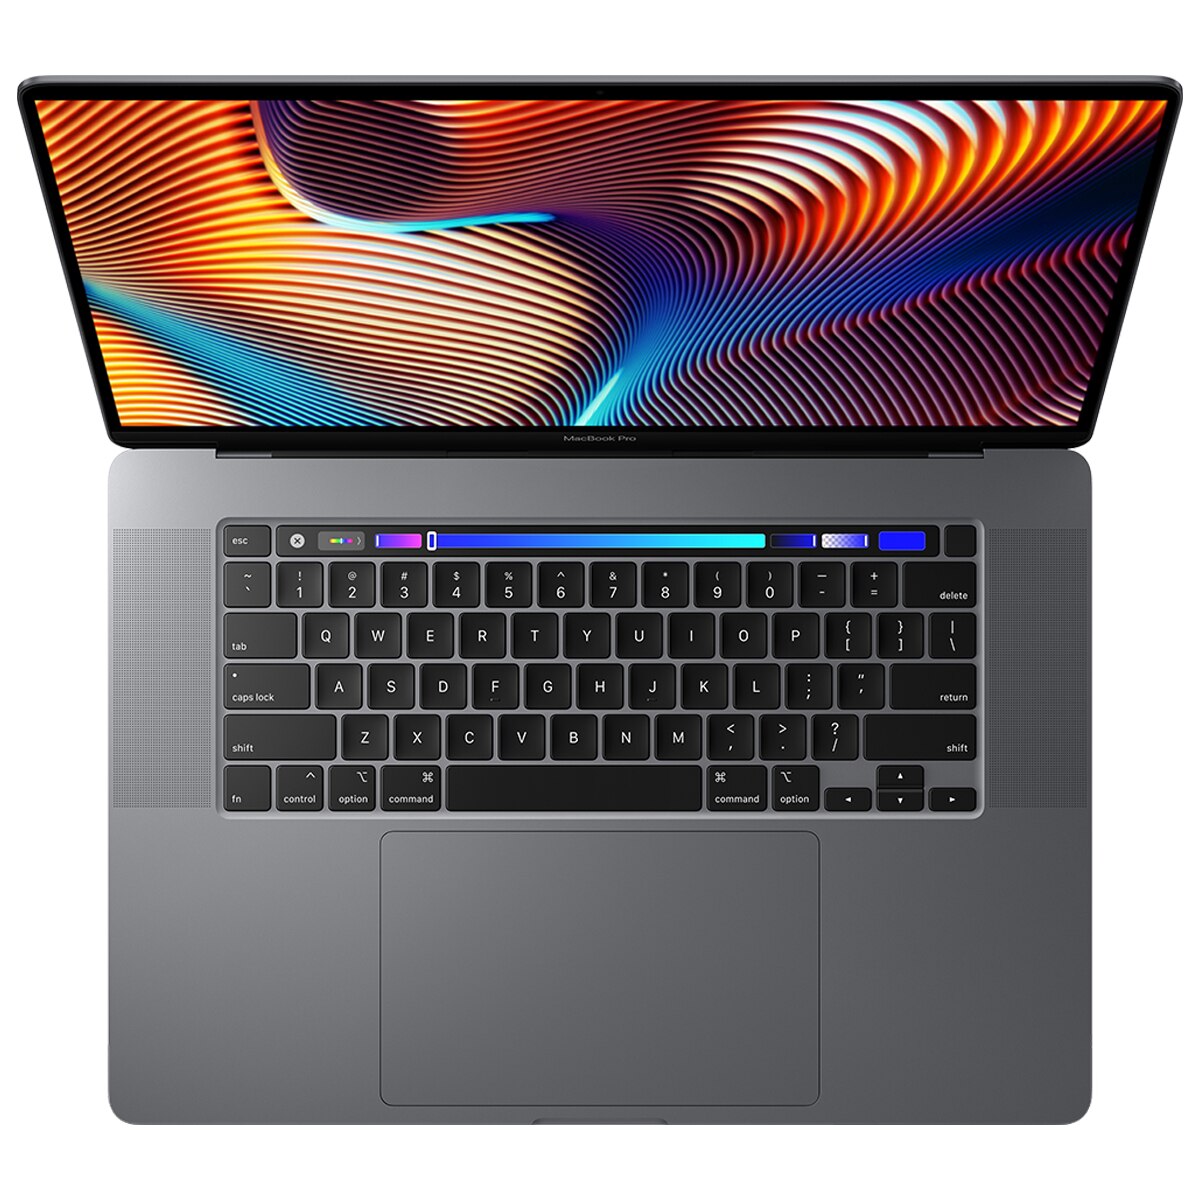 Macbook Pro MUHN2X/A 13-inch MacBook Pro with Touch Bar: 1.4GHz quad-core 8th-generation Intel Core i5 processor, 128GB - Space Grey